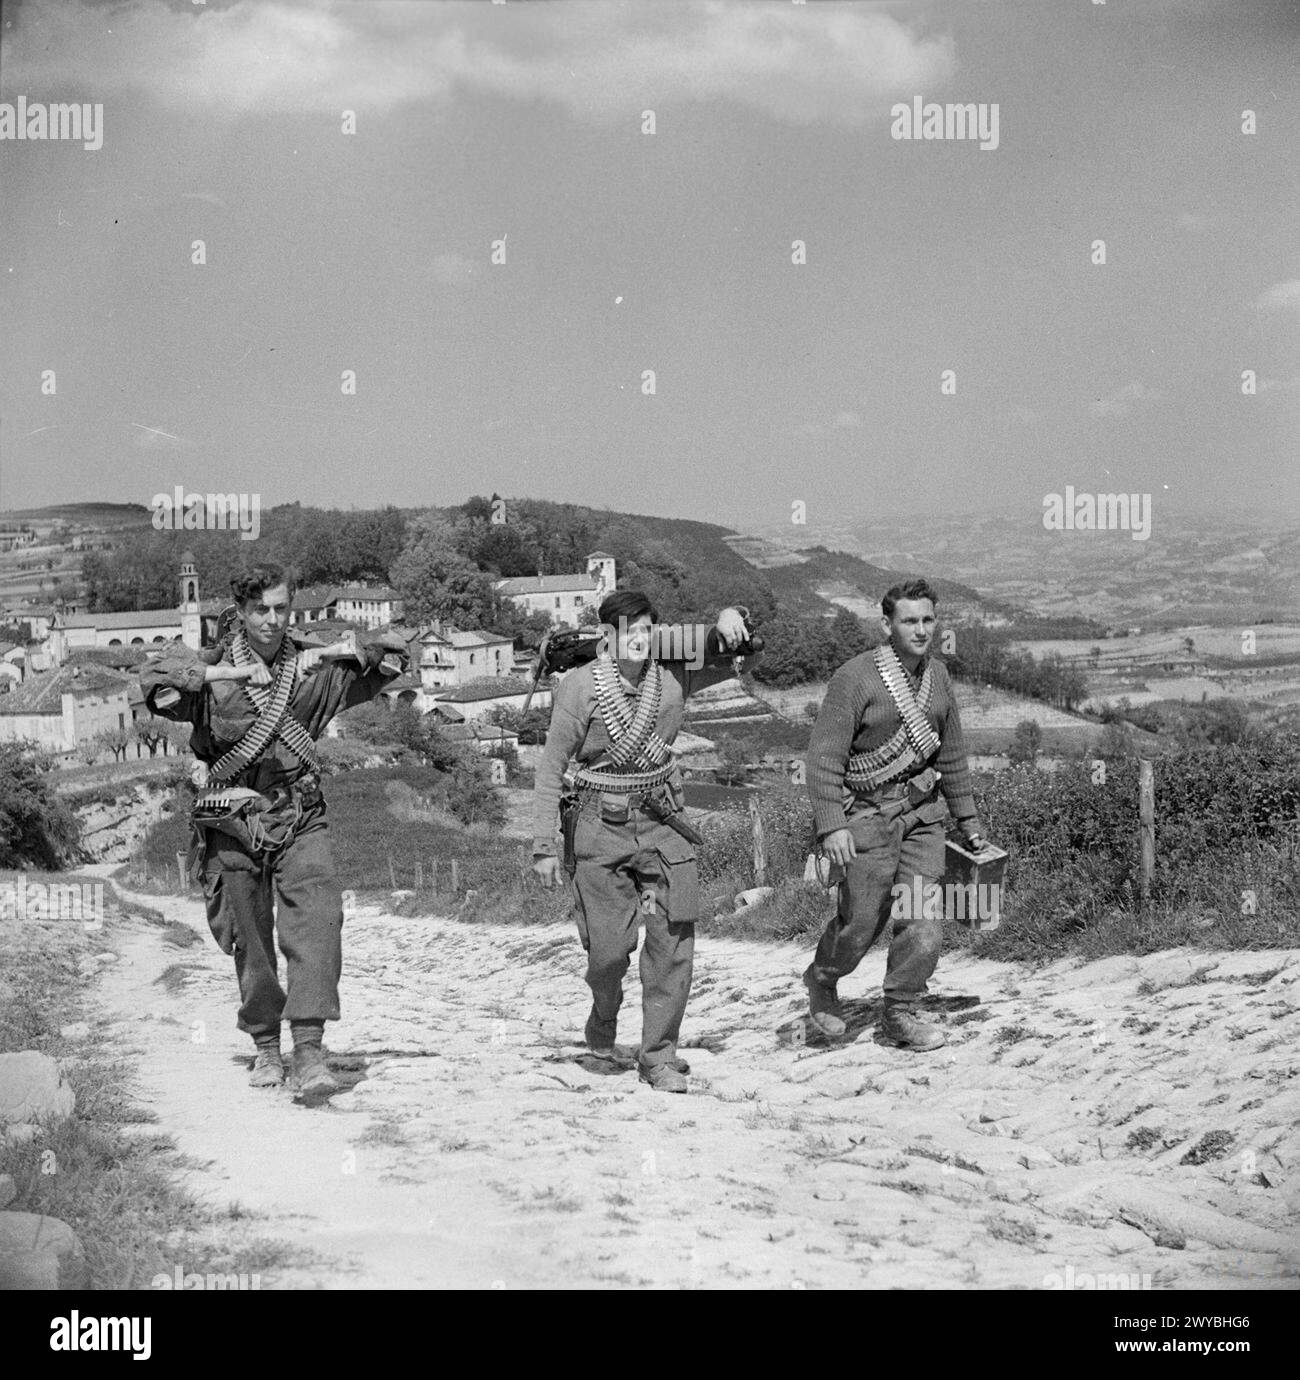 BRITISH SPECIAL FORCES IN ITALY, 1945 - Three heavily armed members of No 2 SAS Regiment, draped with ammunition belts and each carrying components of a Vickers heavy machine gun, climb a mountain path as they go out on an operation to assist Italian partisans in the Castino area of northern Italy. , British Army, Special Air Service Stock Photo